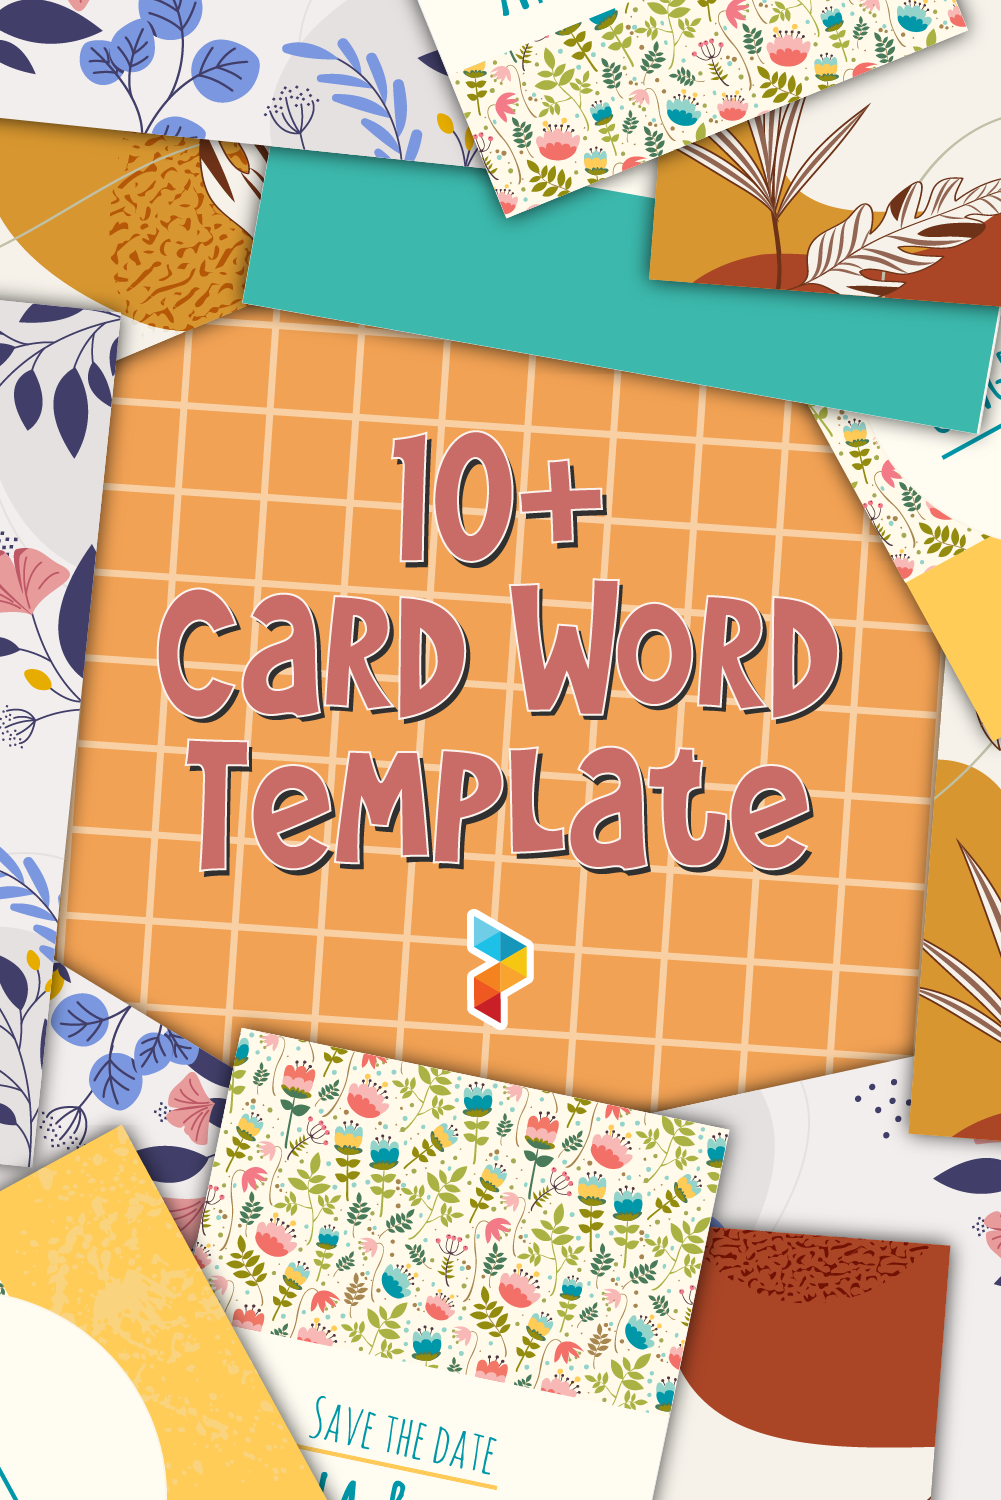 Card Word Template